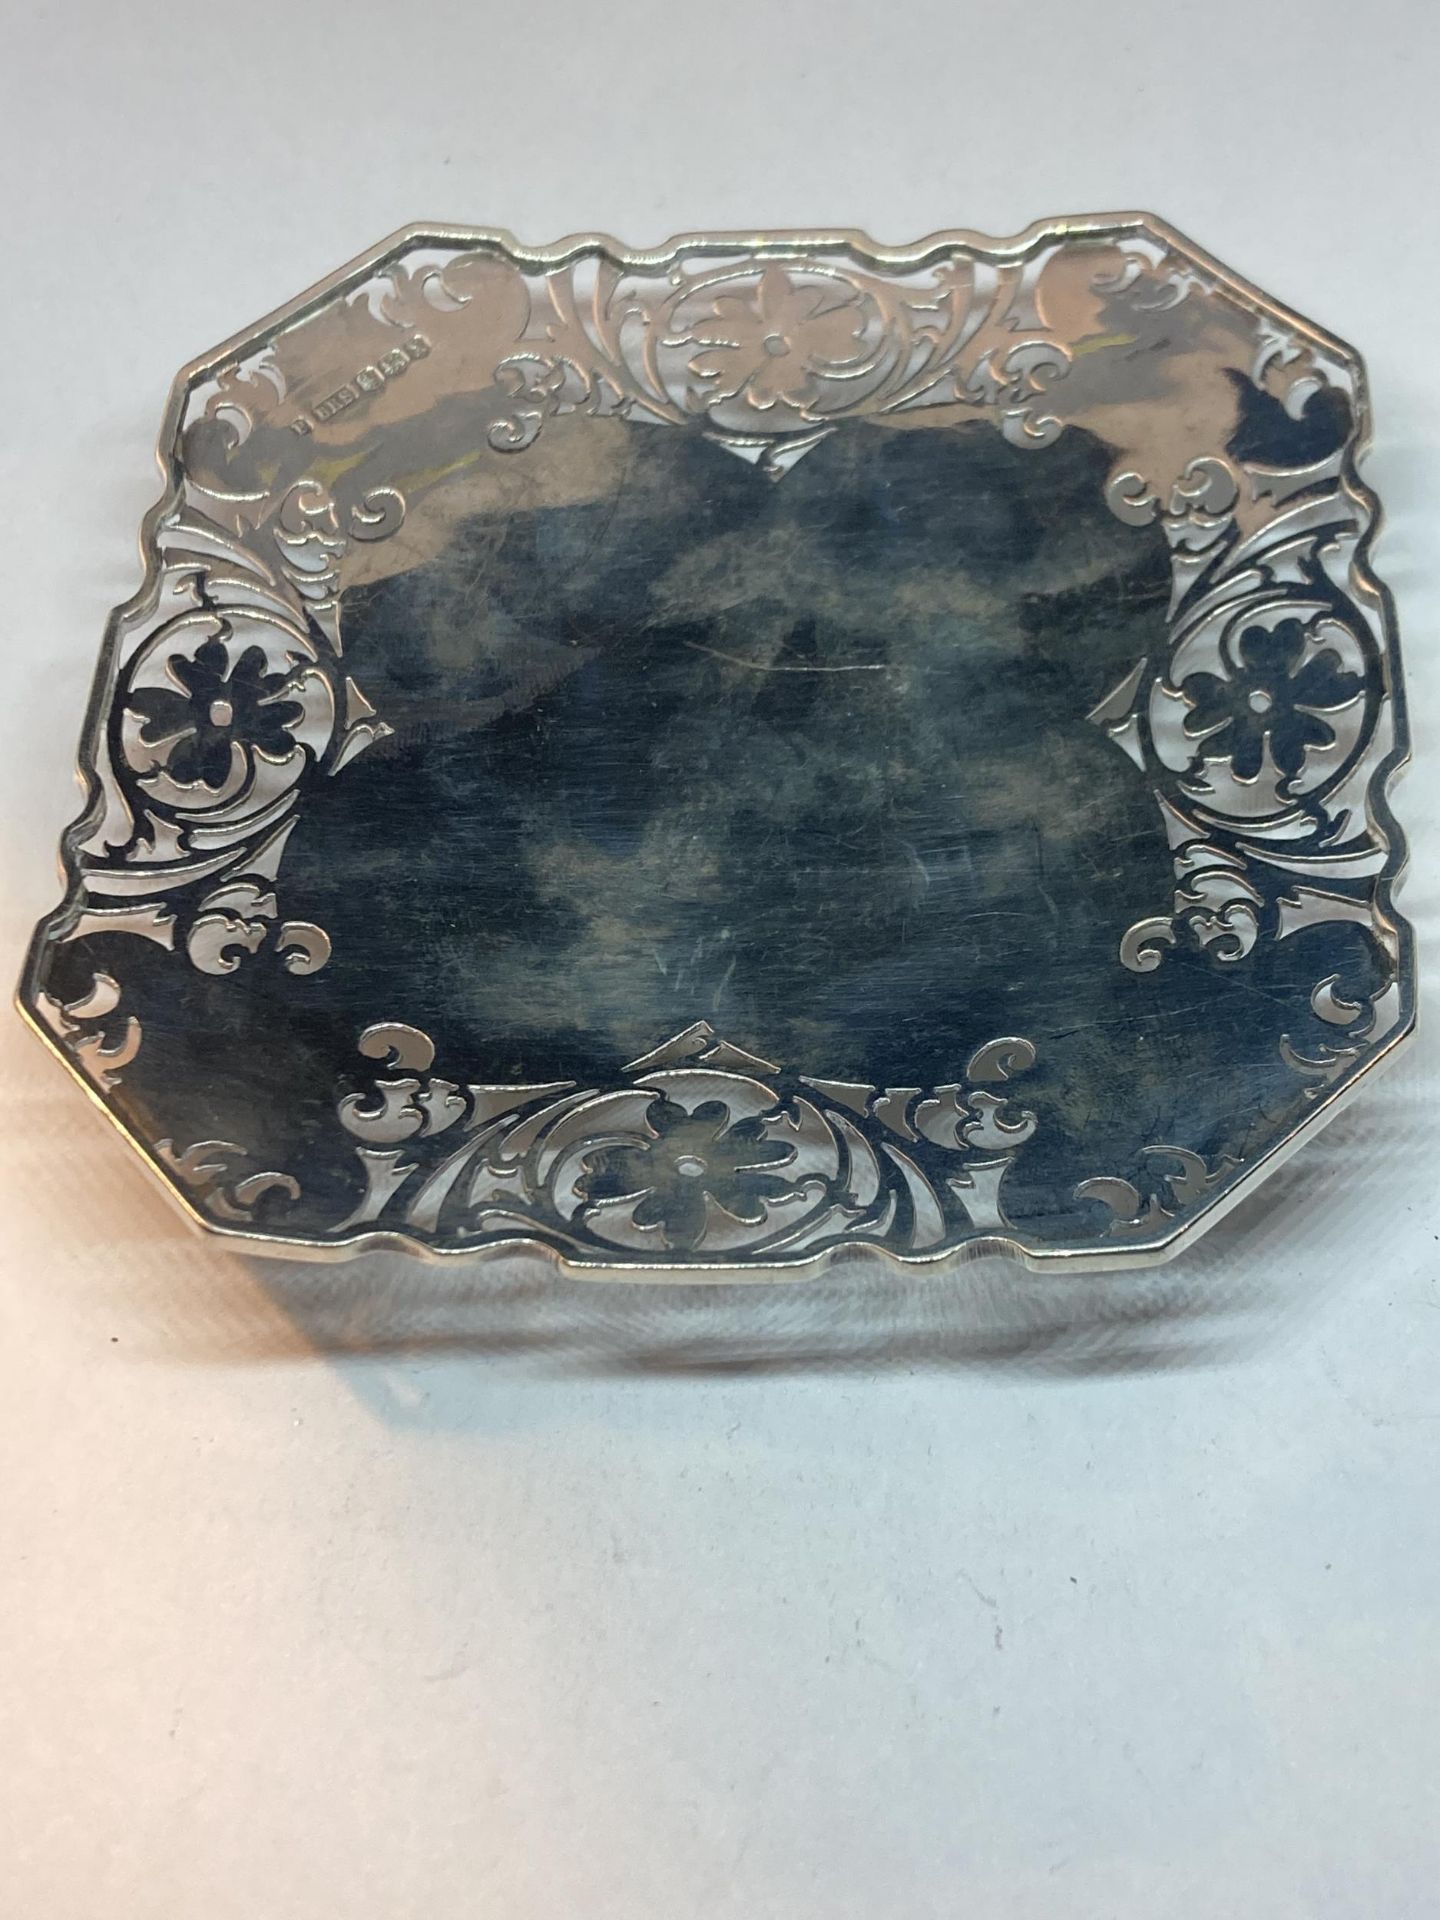 A HALLMARKED SHEFFIELD SILVER SQUARE FOOTED DISH